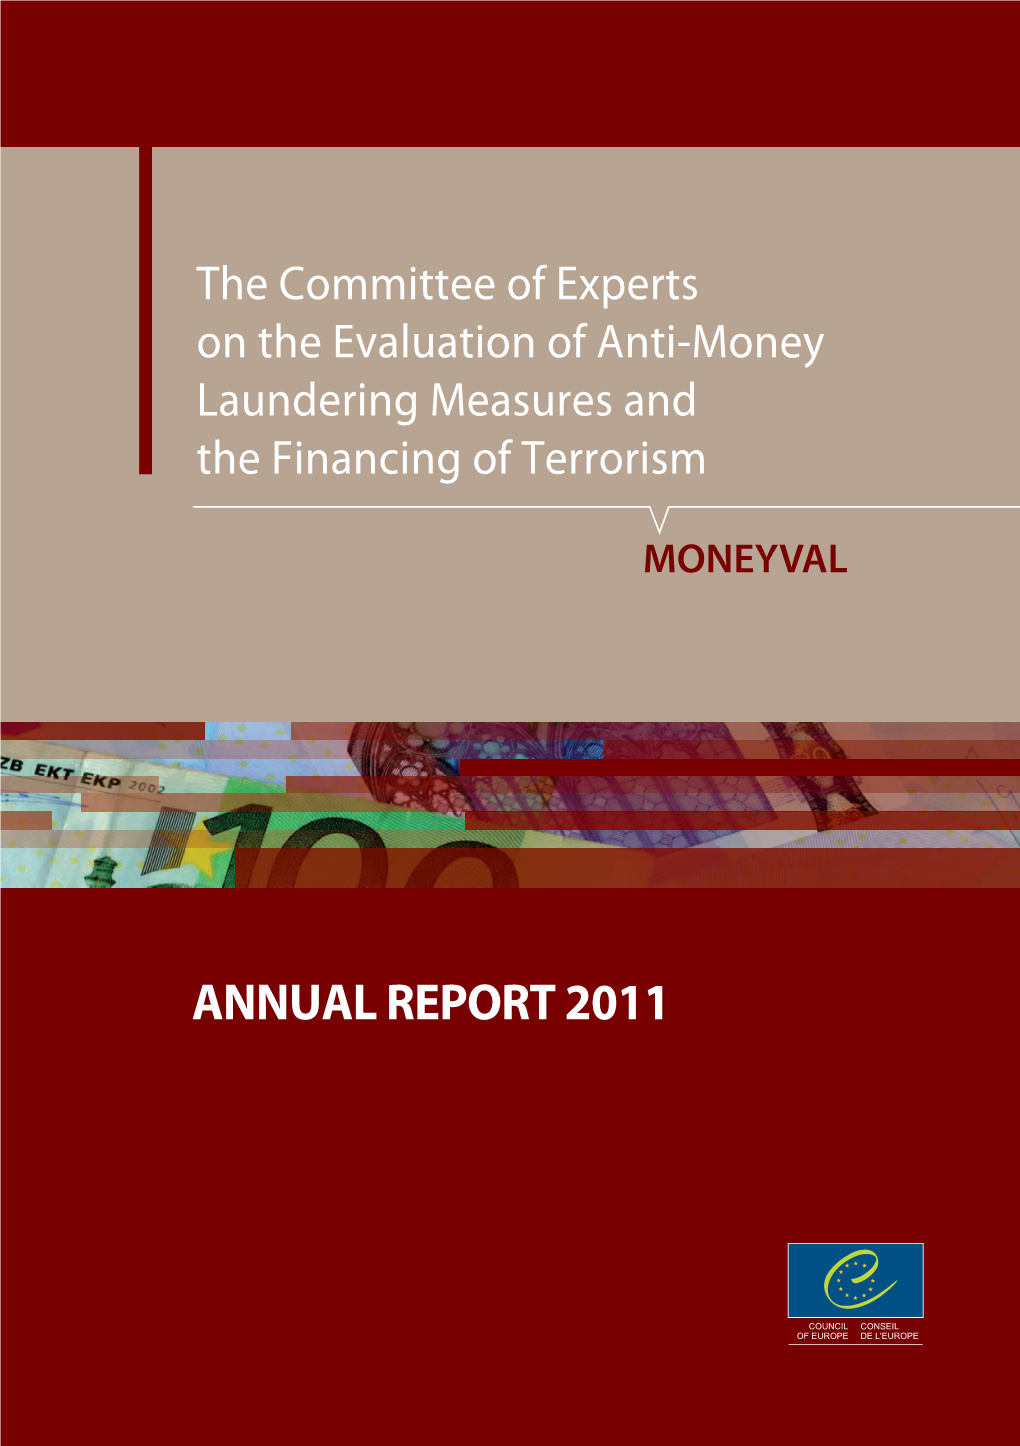 Annual Report for 2011